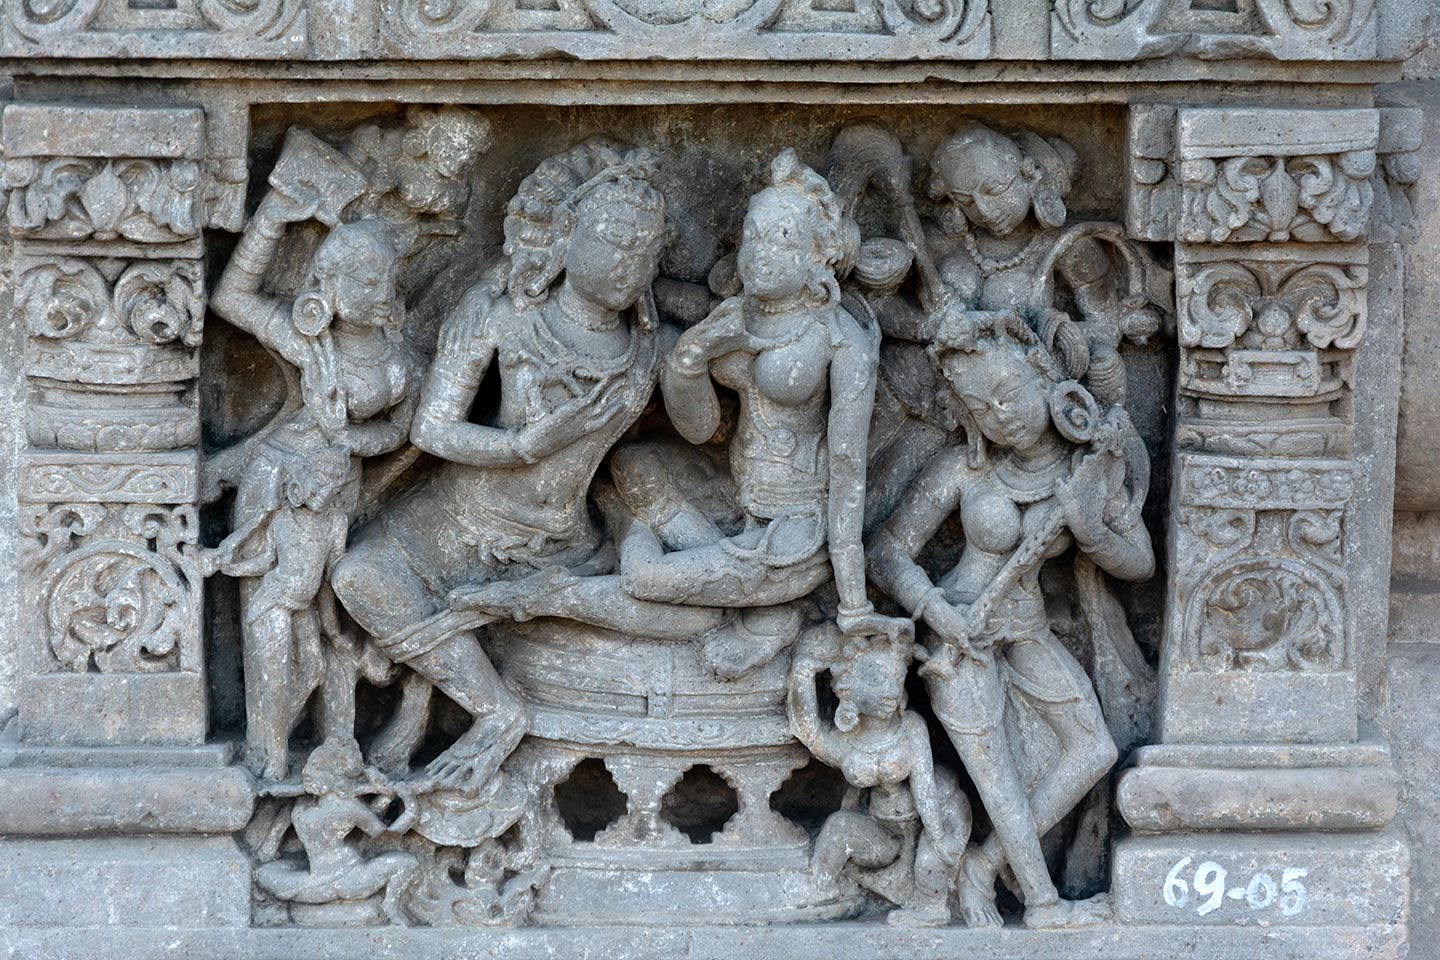 The man is facing the woman and caressing her chin with his left hand and holding a flower in his right hand. The female has her right hand placed over the man’s right shoulder, while her left-hand rests upon the head of a female attendant seated on the ground. The man is resting his right foot on a lotus next to a musician playing the flute (bottom left). Three more attendants appear on the left, with the largest one holding a fan.